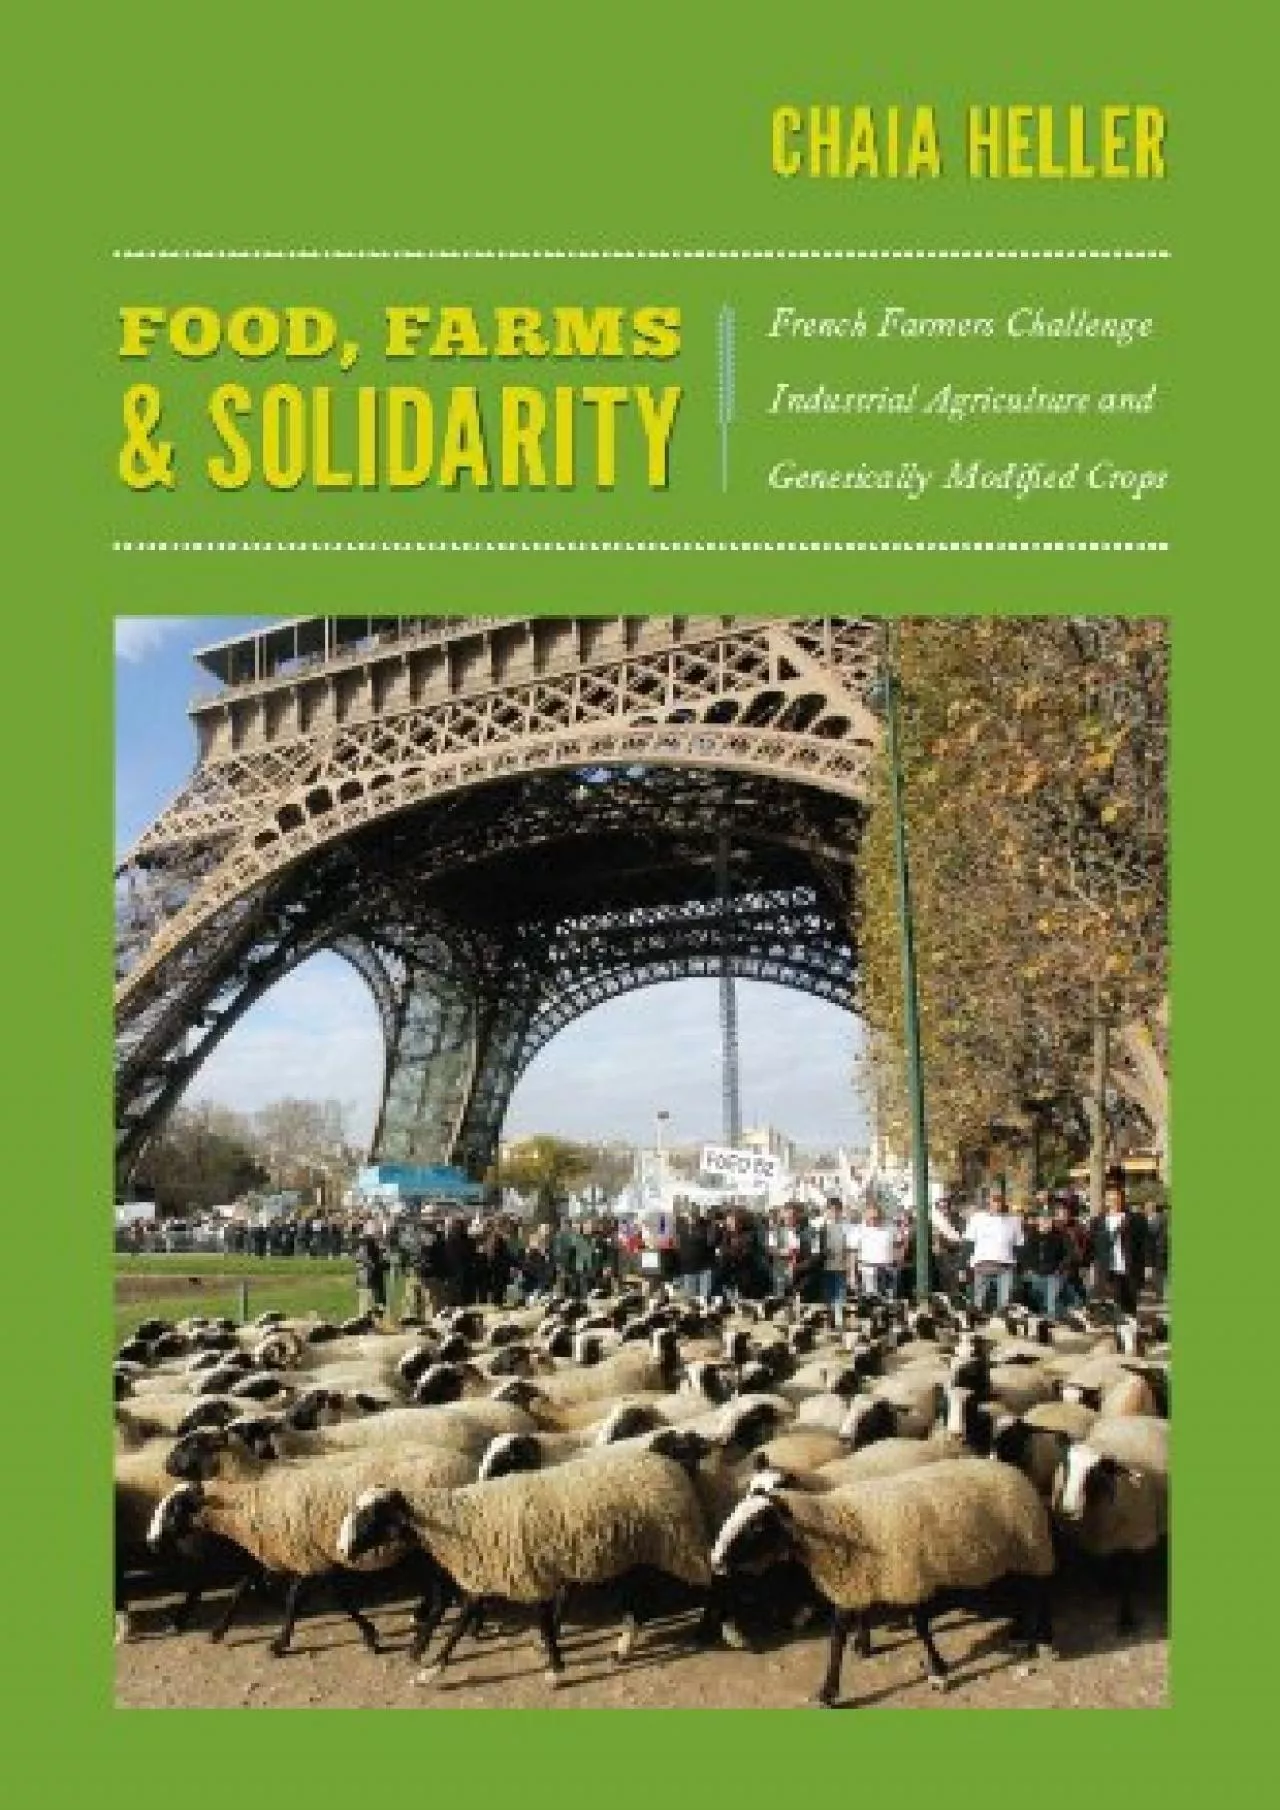 (BOOS)-Food, Farms, and Solidarity: French Farmers Challenge Industrial Agriculture and